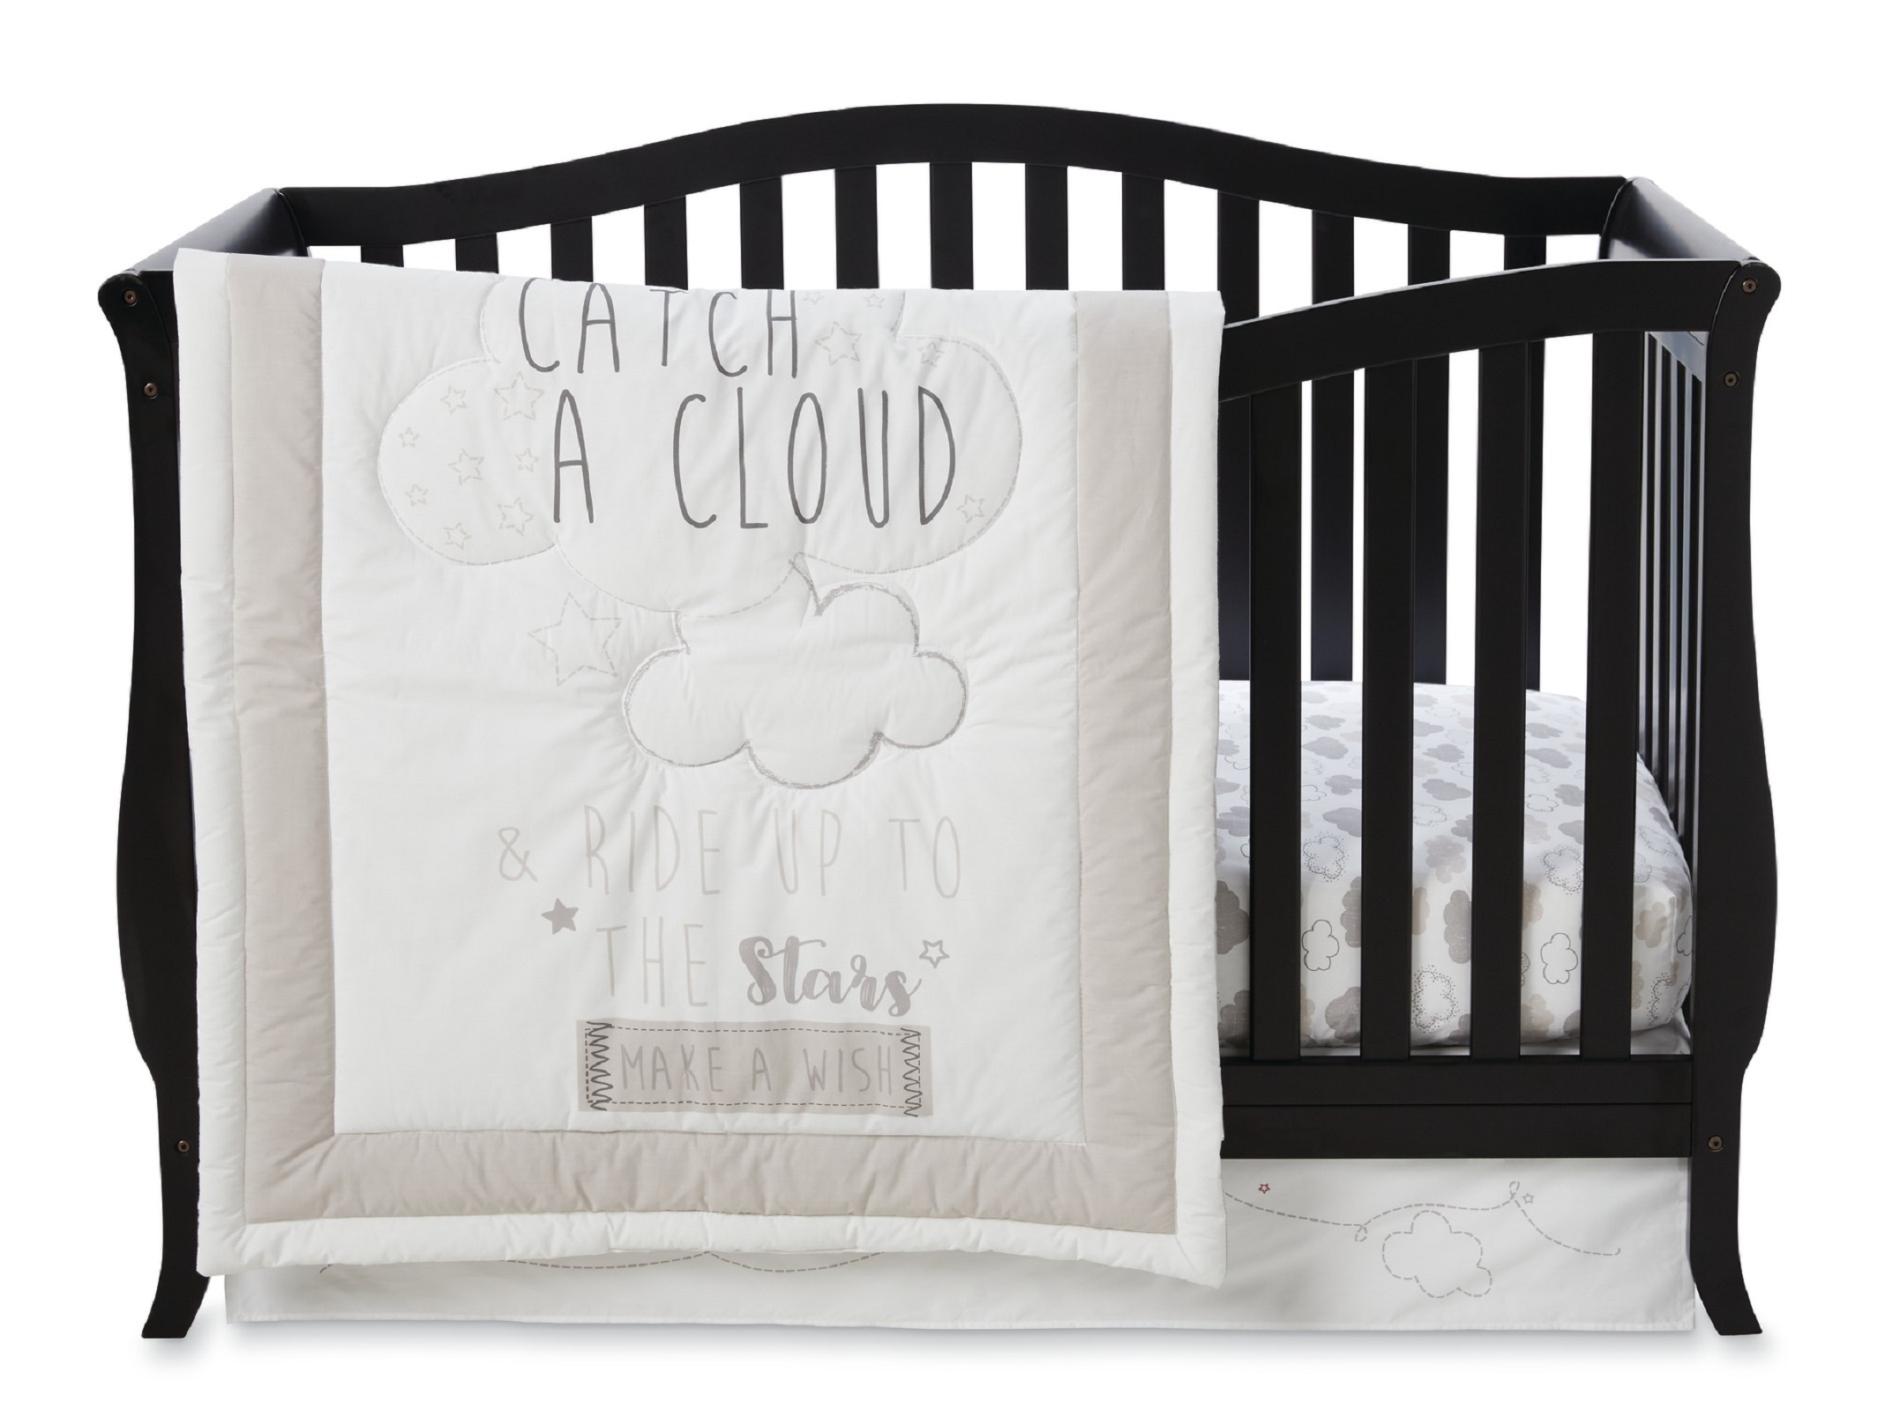 cloud baby bedding sets